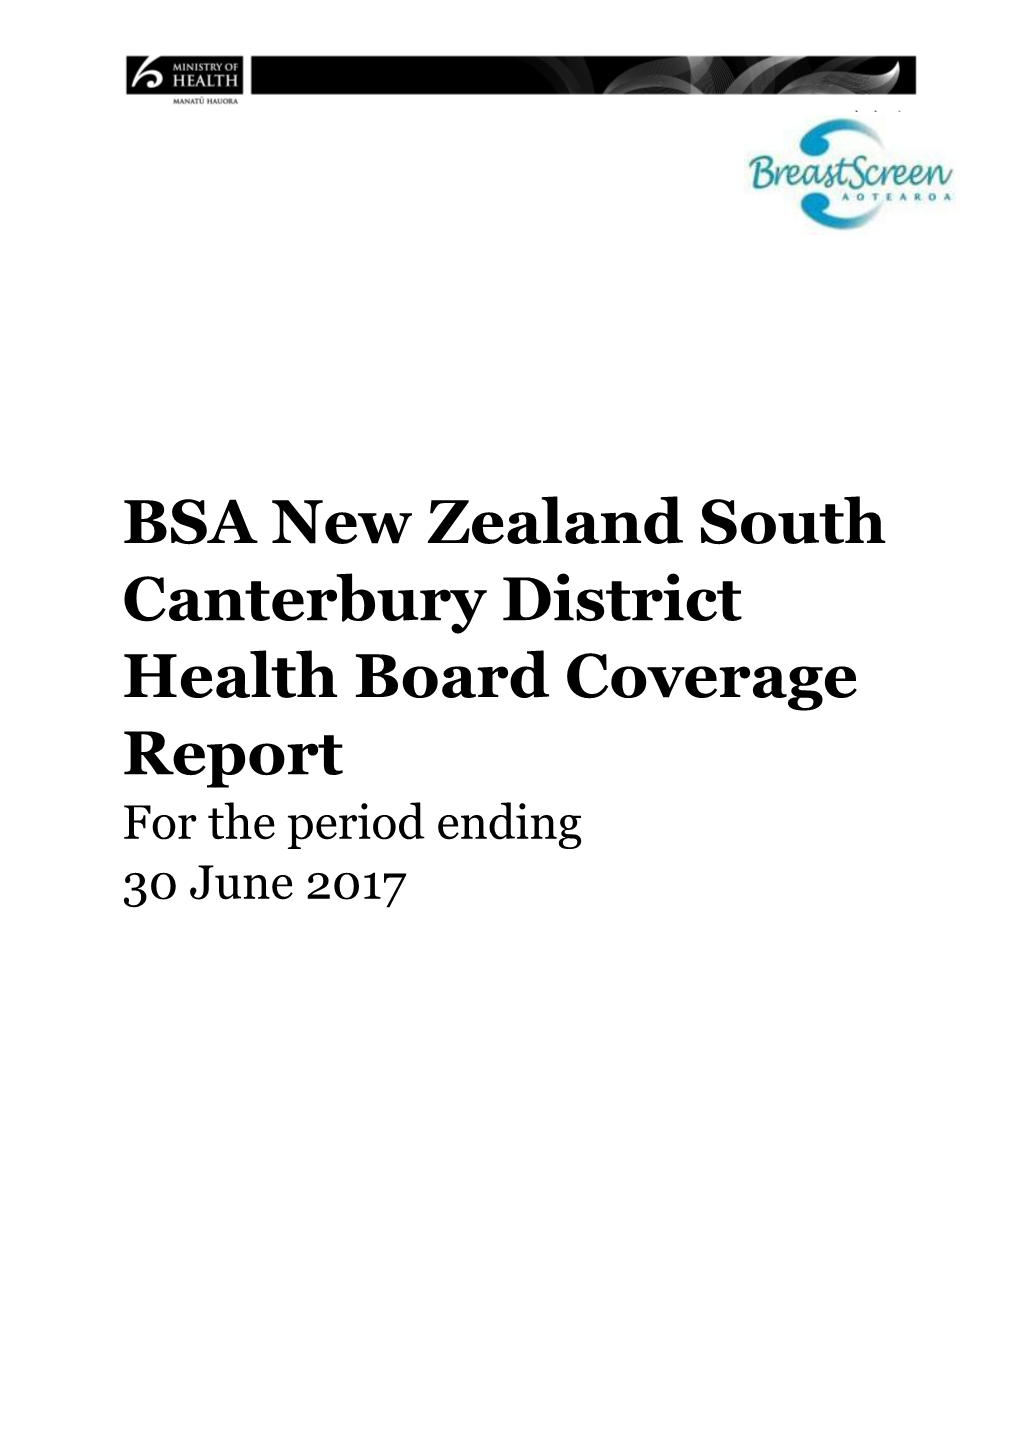 Bsanew Zealand South Canterbury District Health Boardcoverage Report